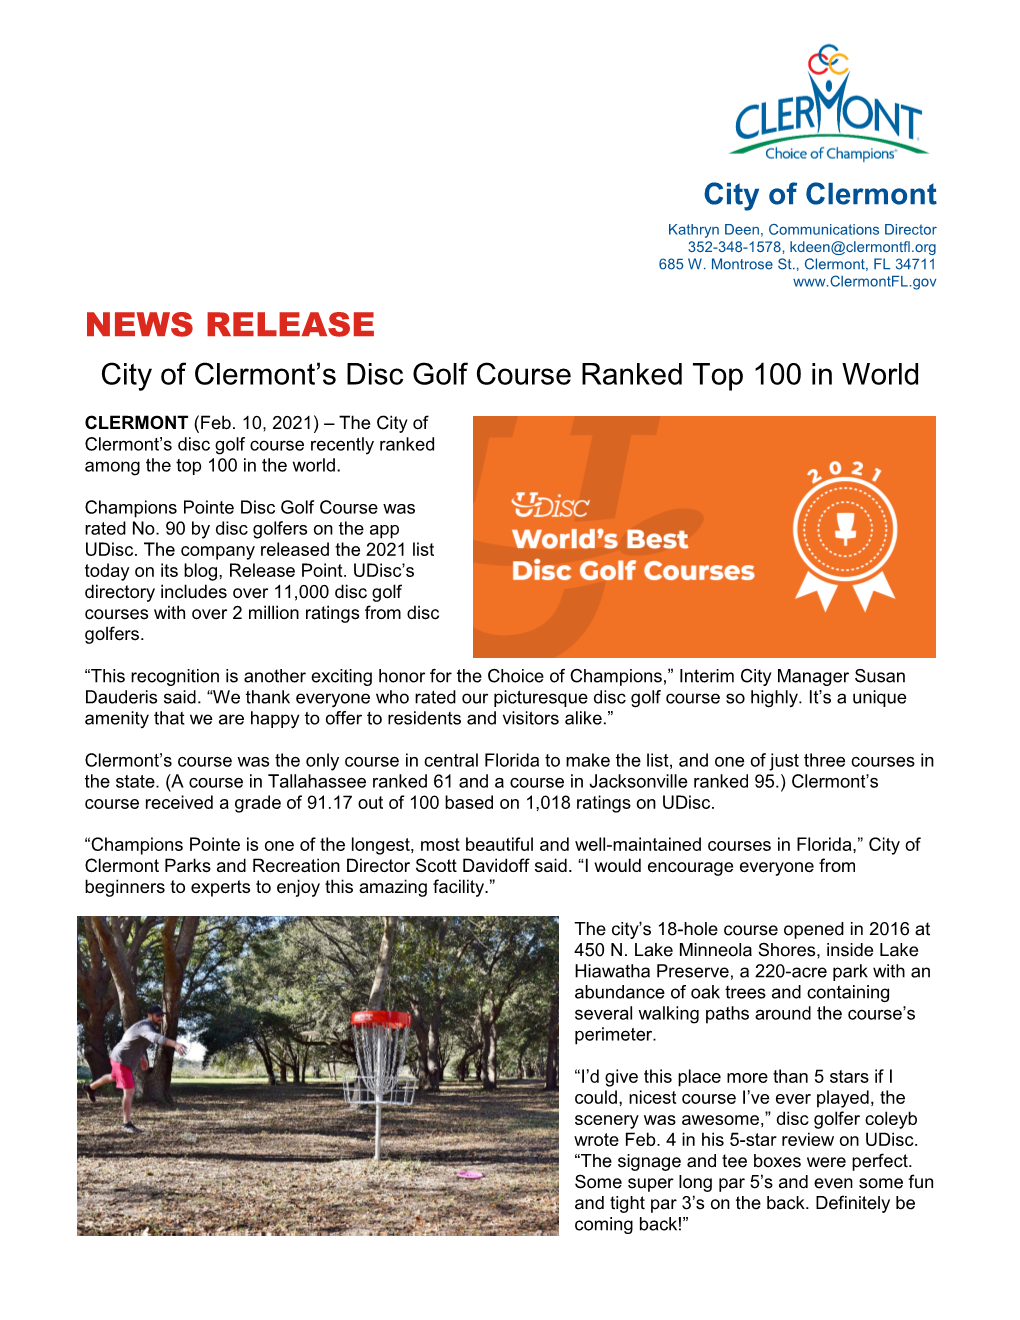 NEWS RELEASE City of Clermont’S Disc Golf Course Ranked Top 100 in World